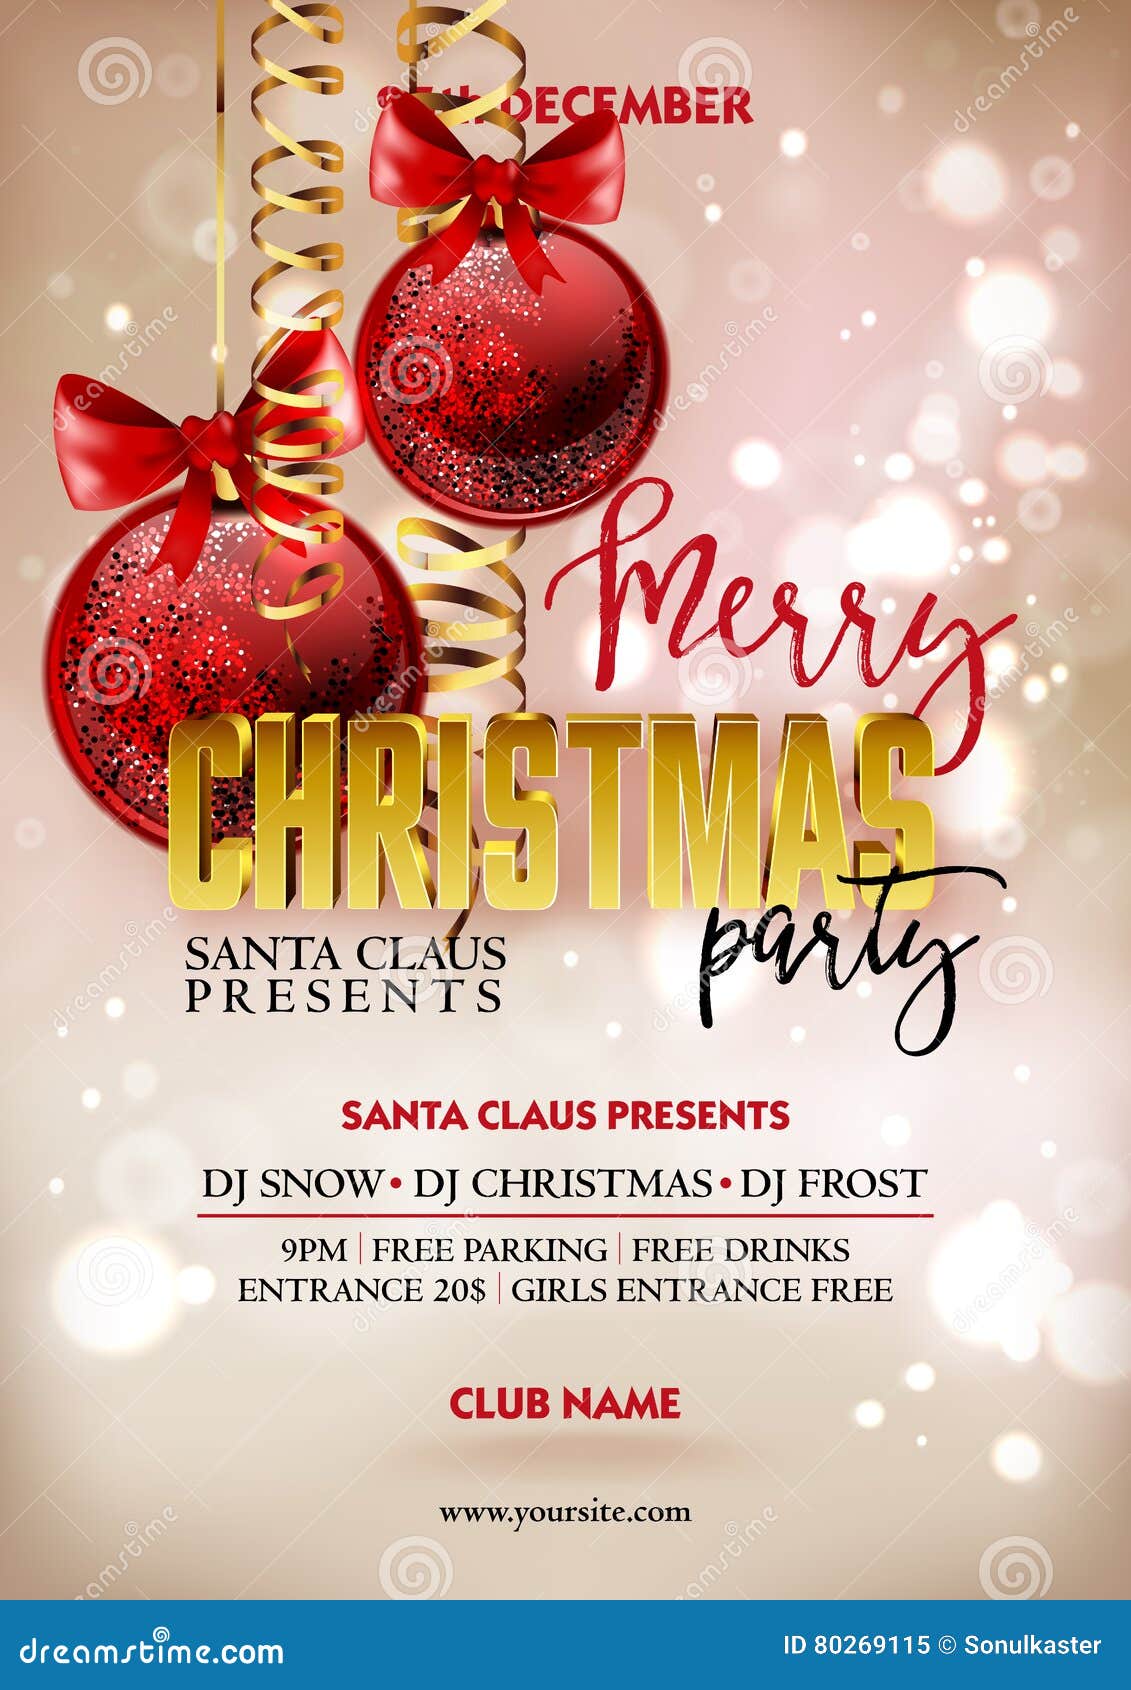 Merry Christmas Party Poster Design Template With 